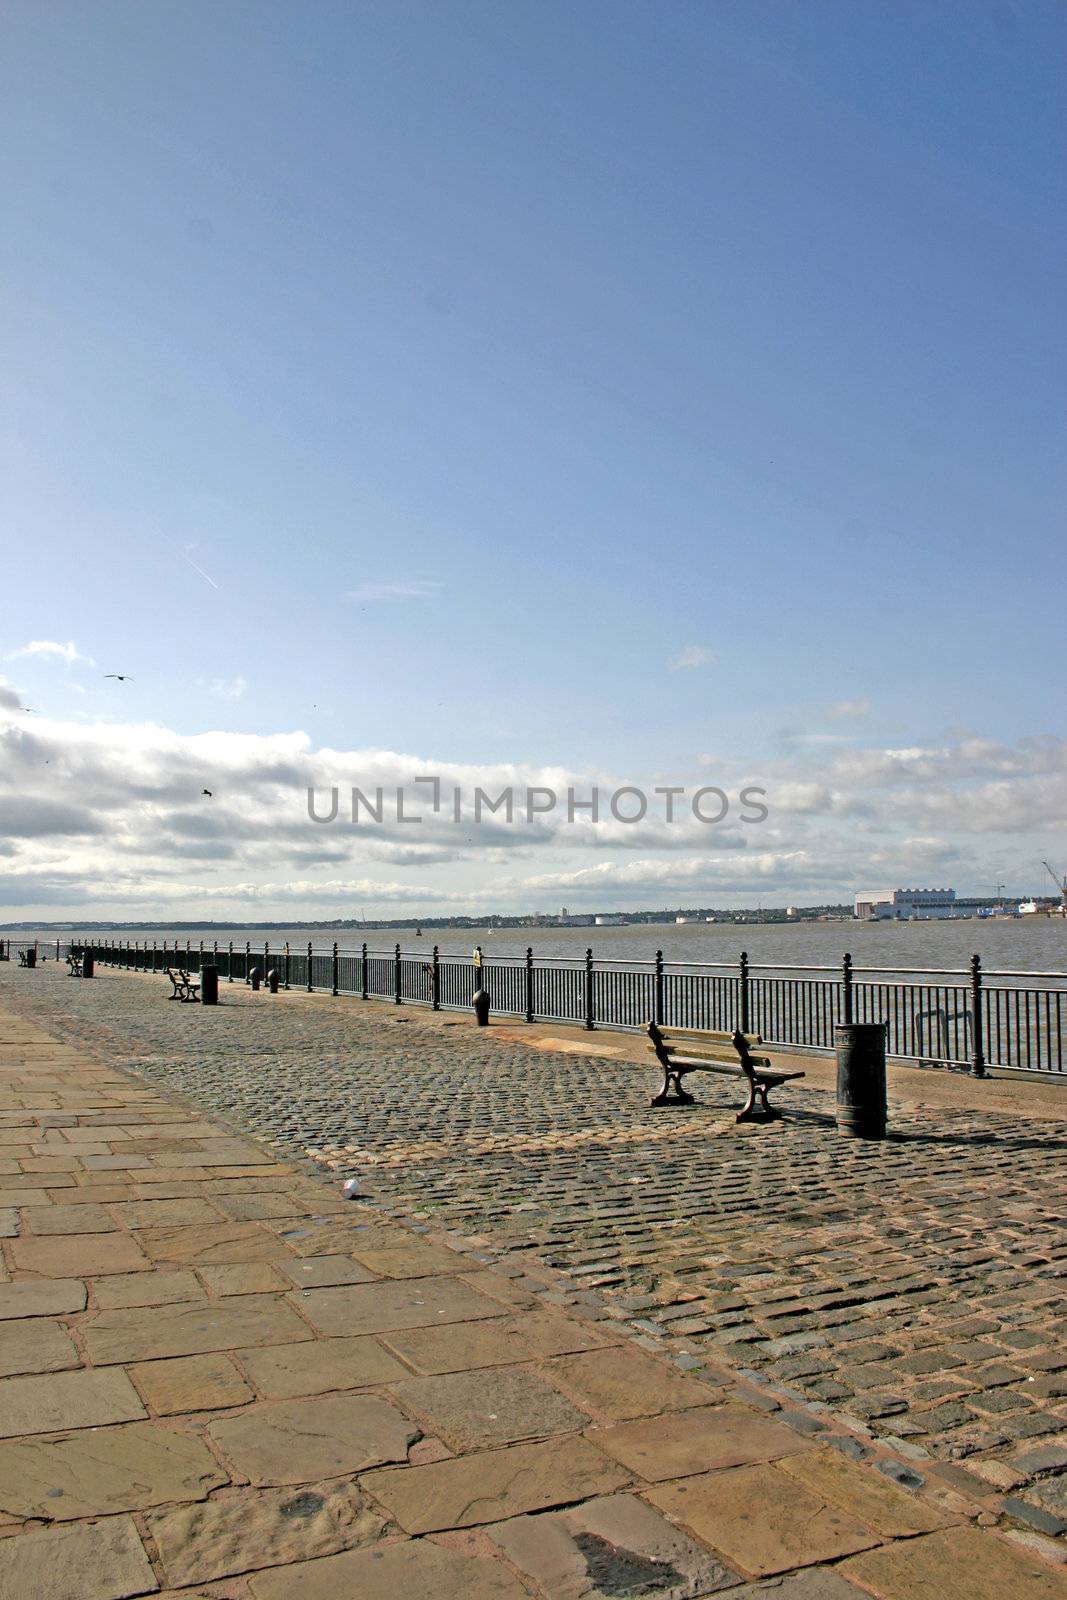 Waterfront Promenade on the River Mersey in Liverpool England UK